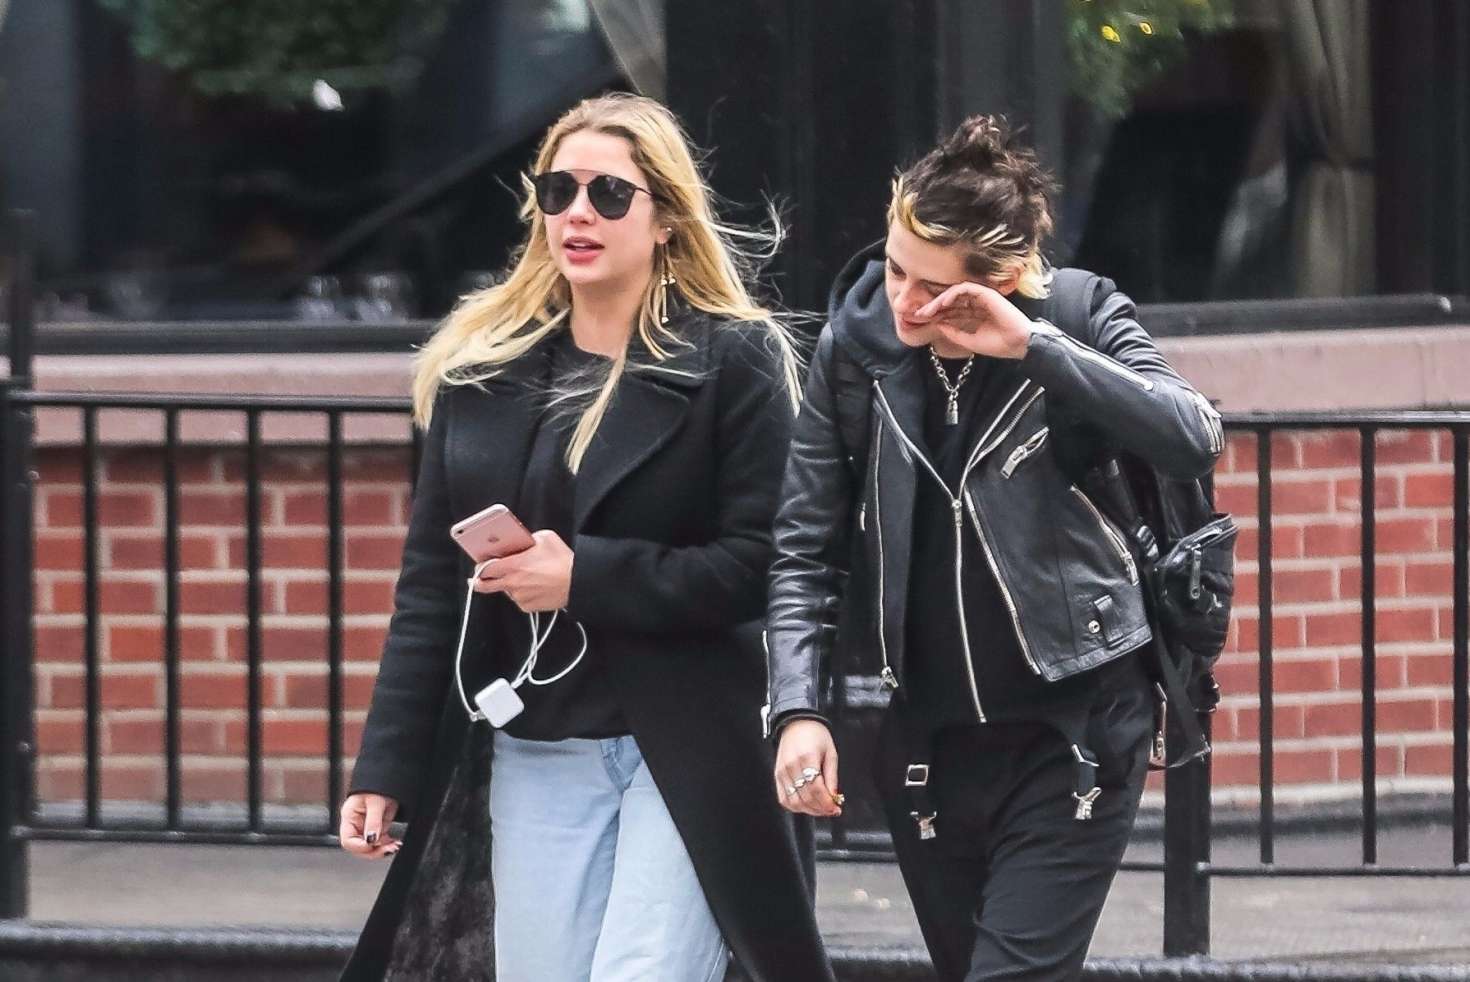 Ashley Benson and Kristen Stewart out together in NYC -29 | GotCeleb